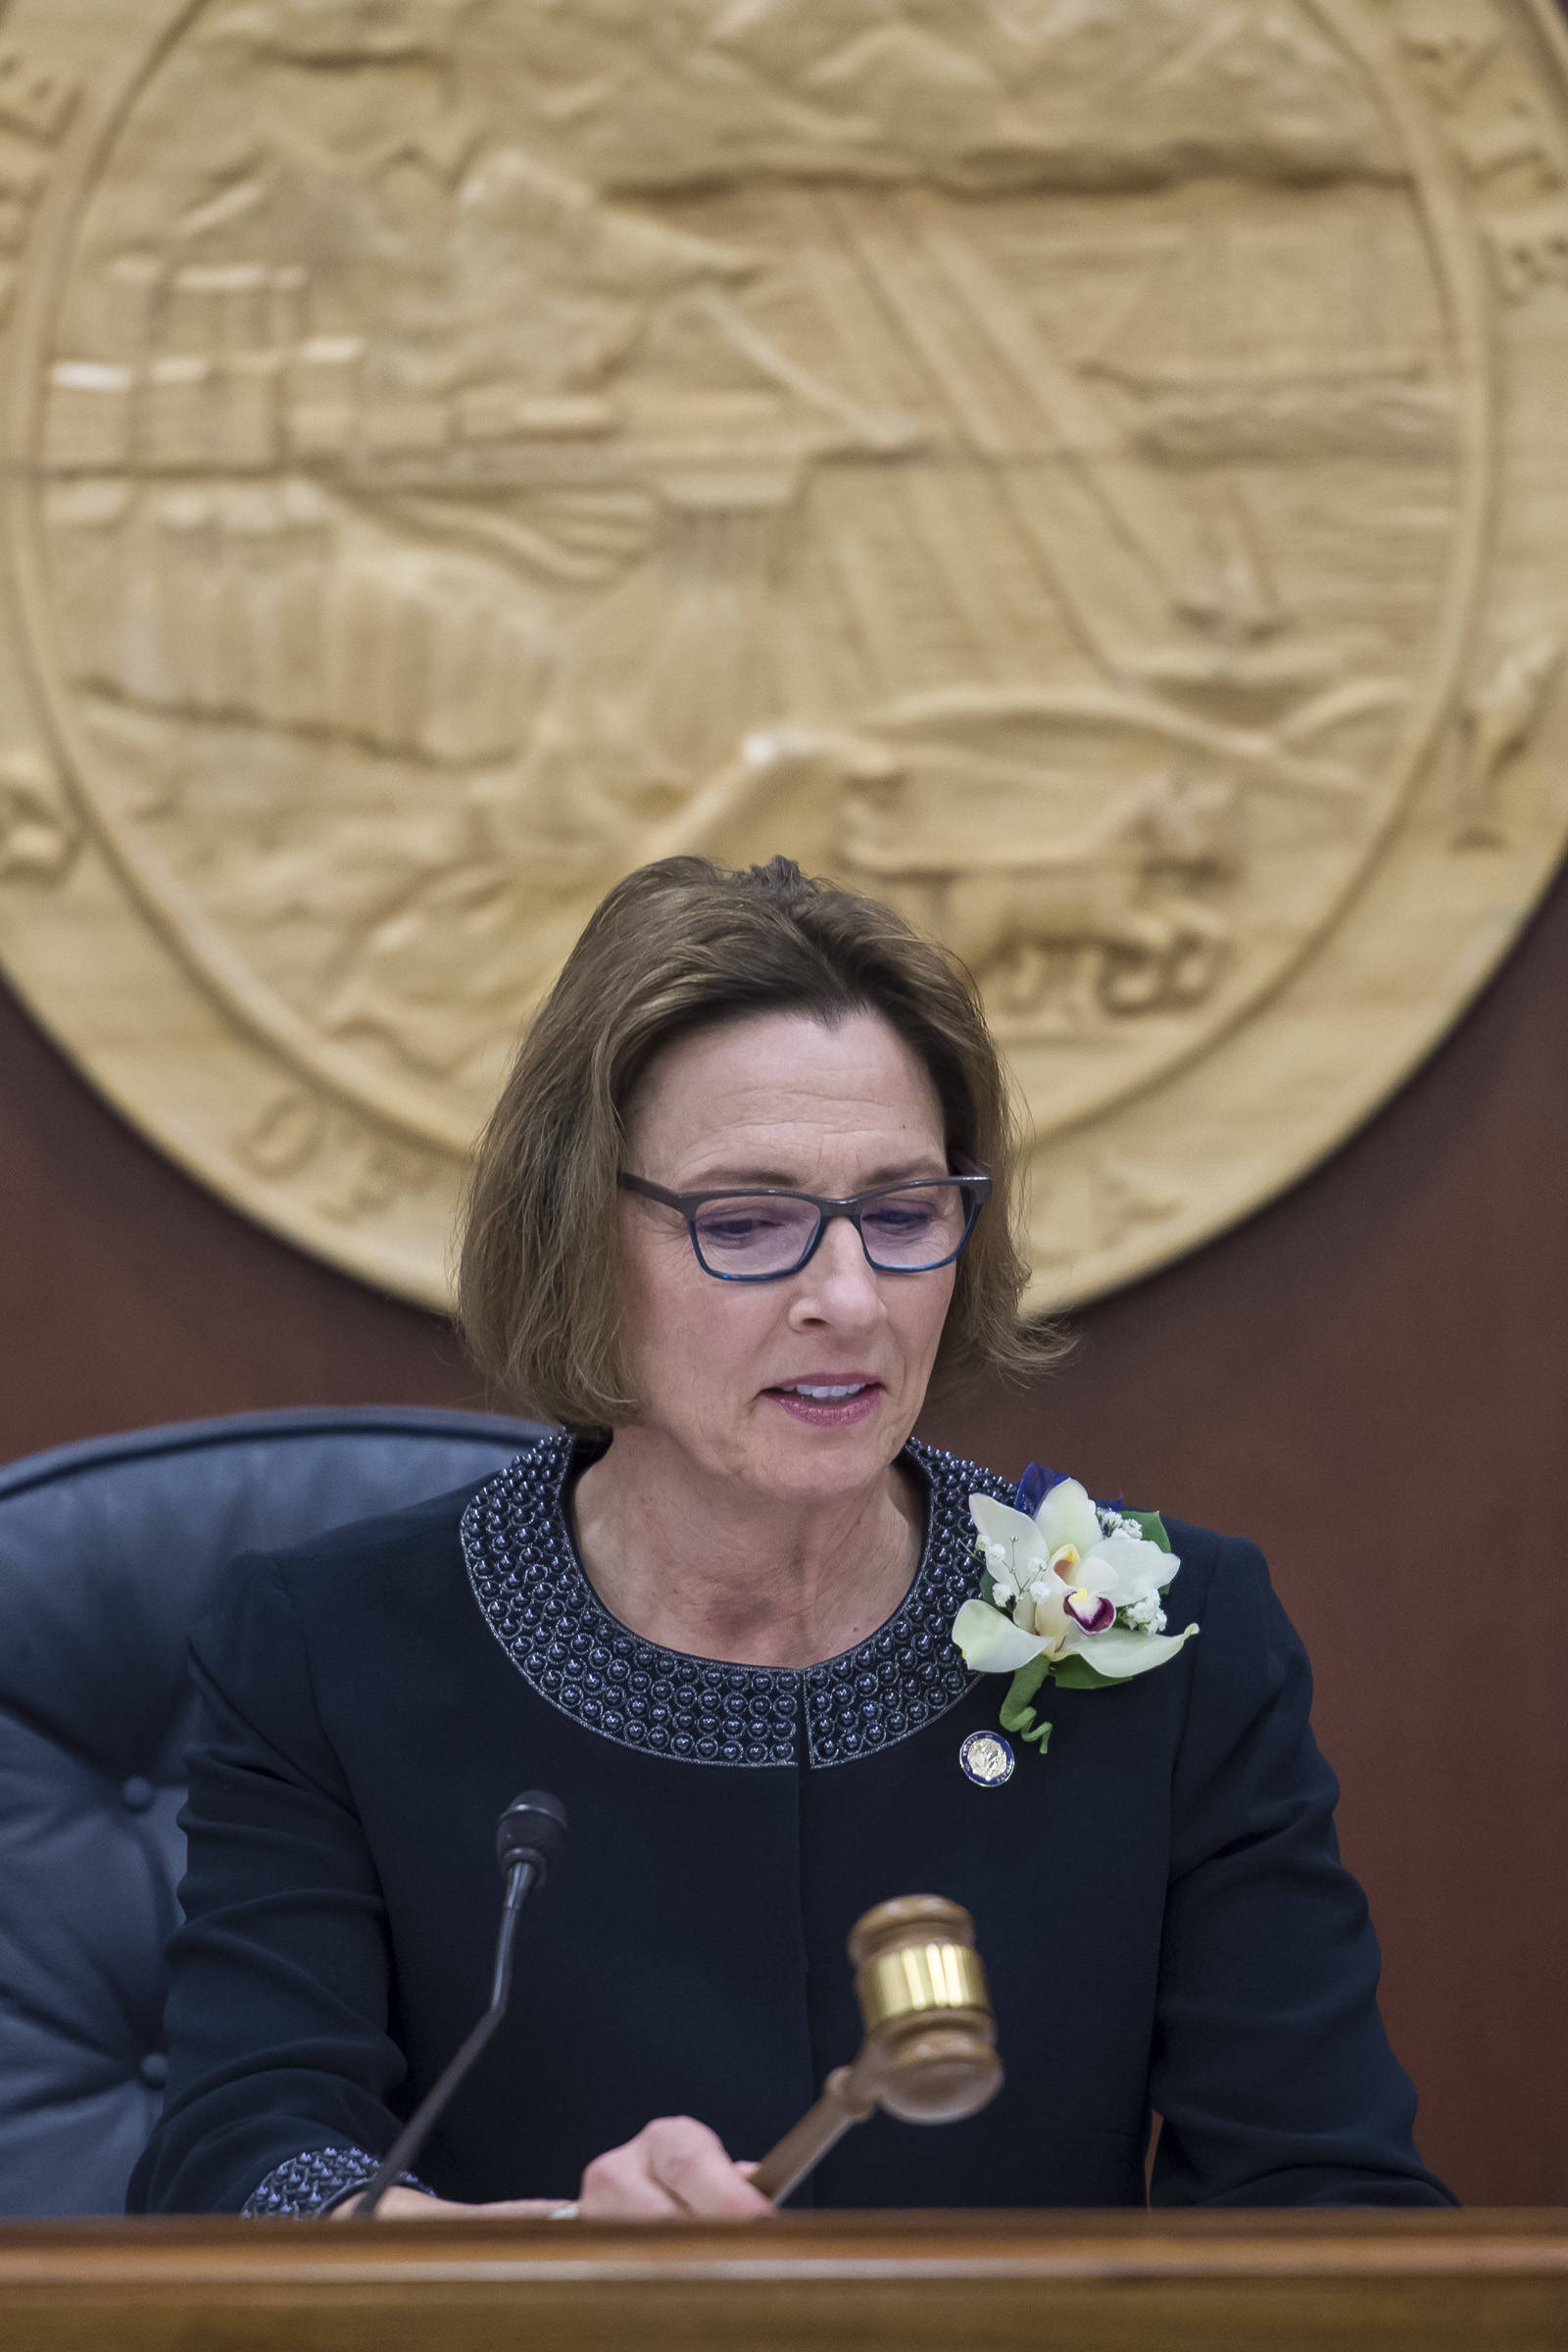 Senate President Cathy Giessel, R-Anchorage, gavels in on the opening day of the 31st Session of the Alaska Legislature on Tuesday, Jan. 15, 2019. (Michael Penn | Juneau Empire)